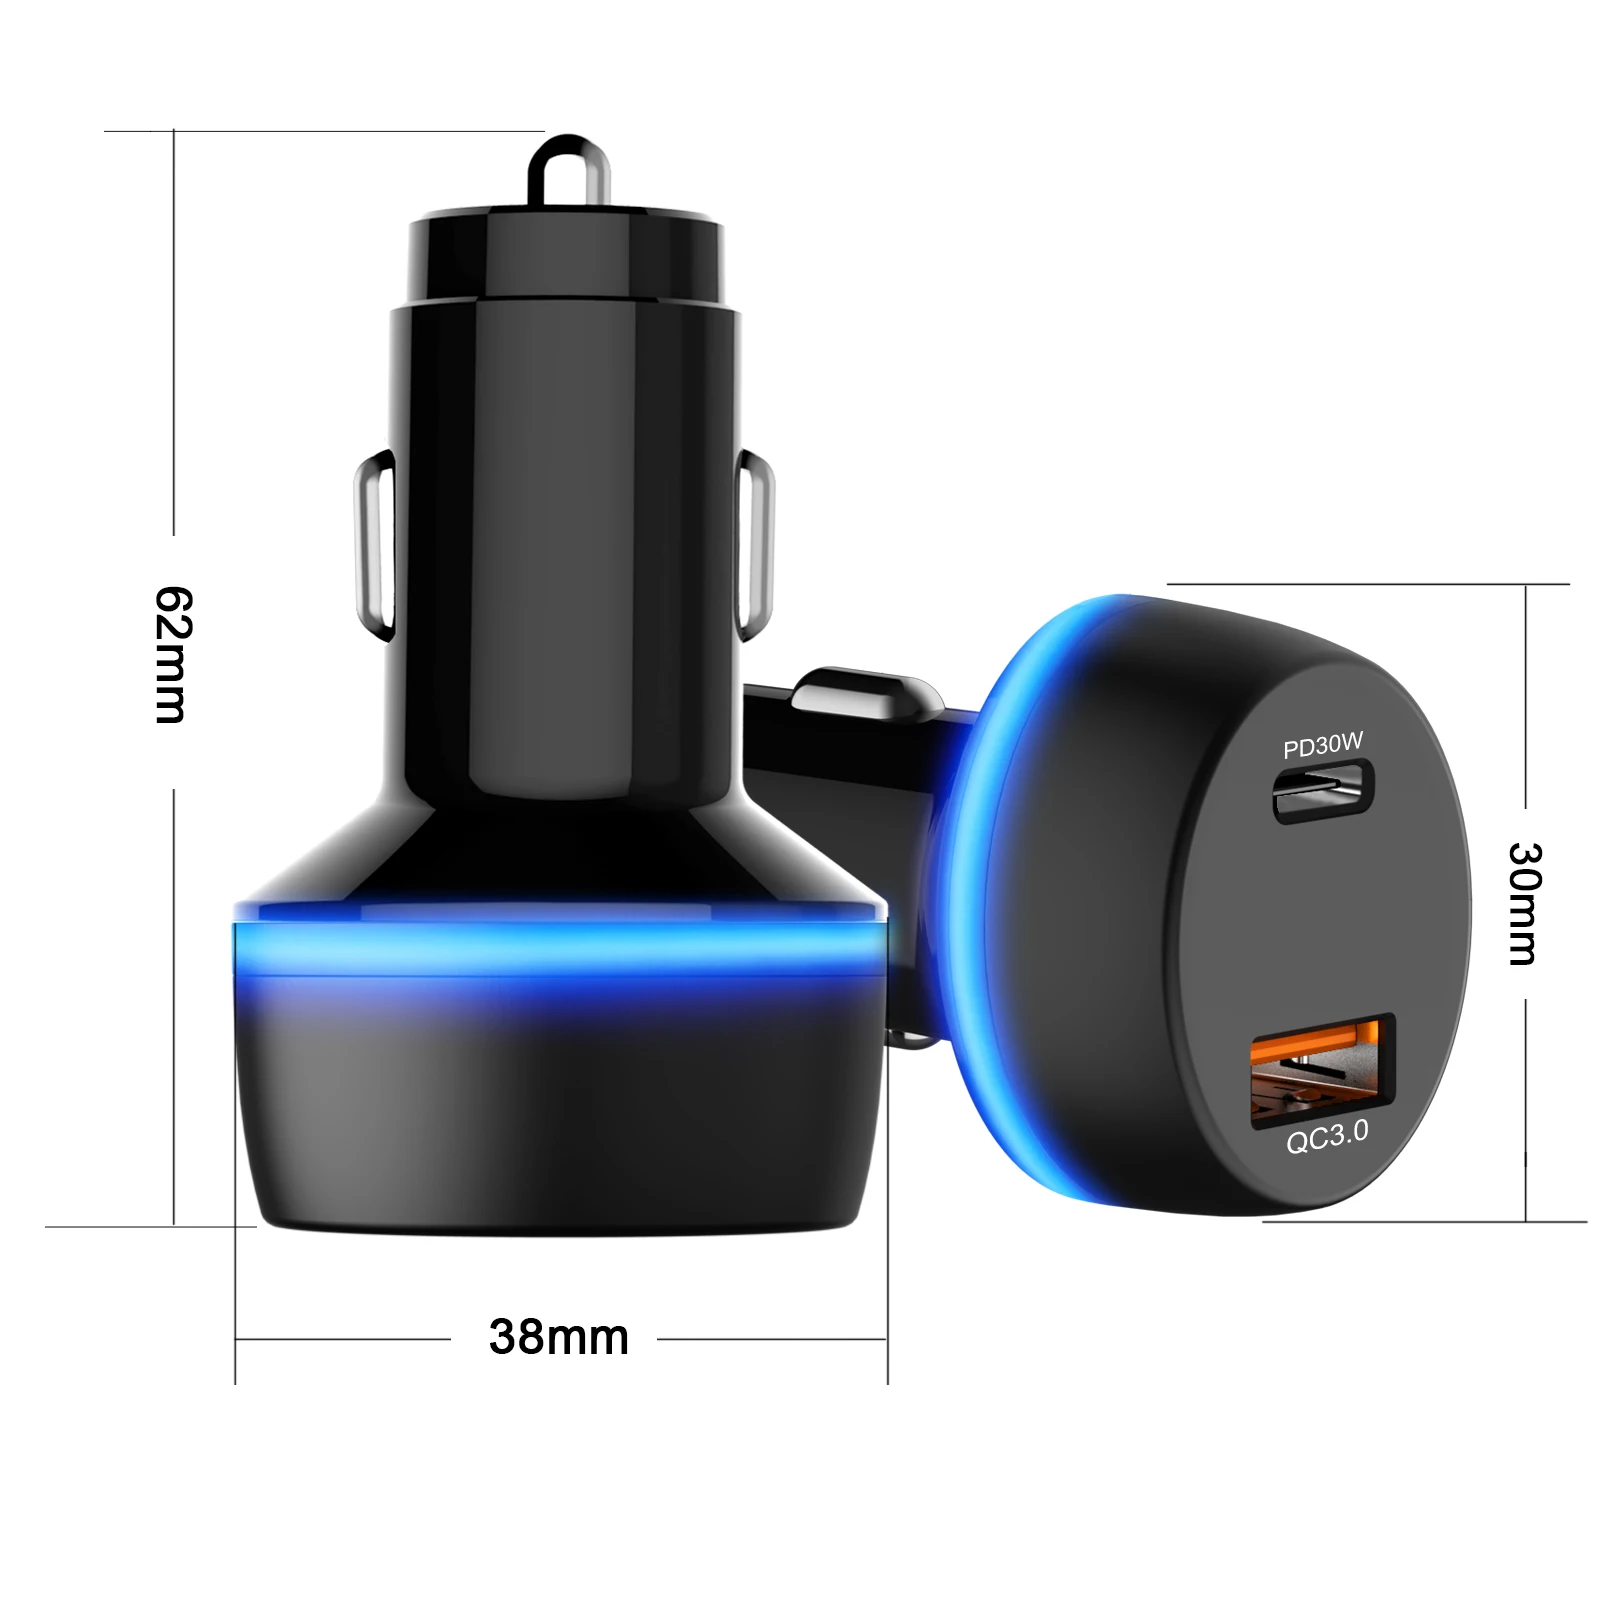 

led light ring 48w max pd 30w usb c car charger qc3.0 pps pd 30w charger power, Black or oem